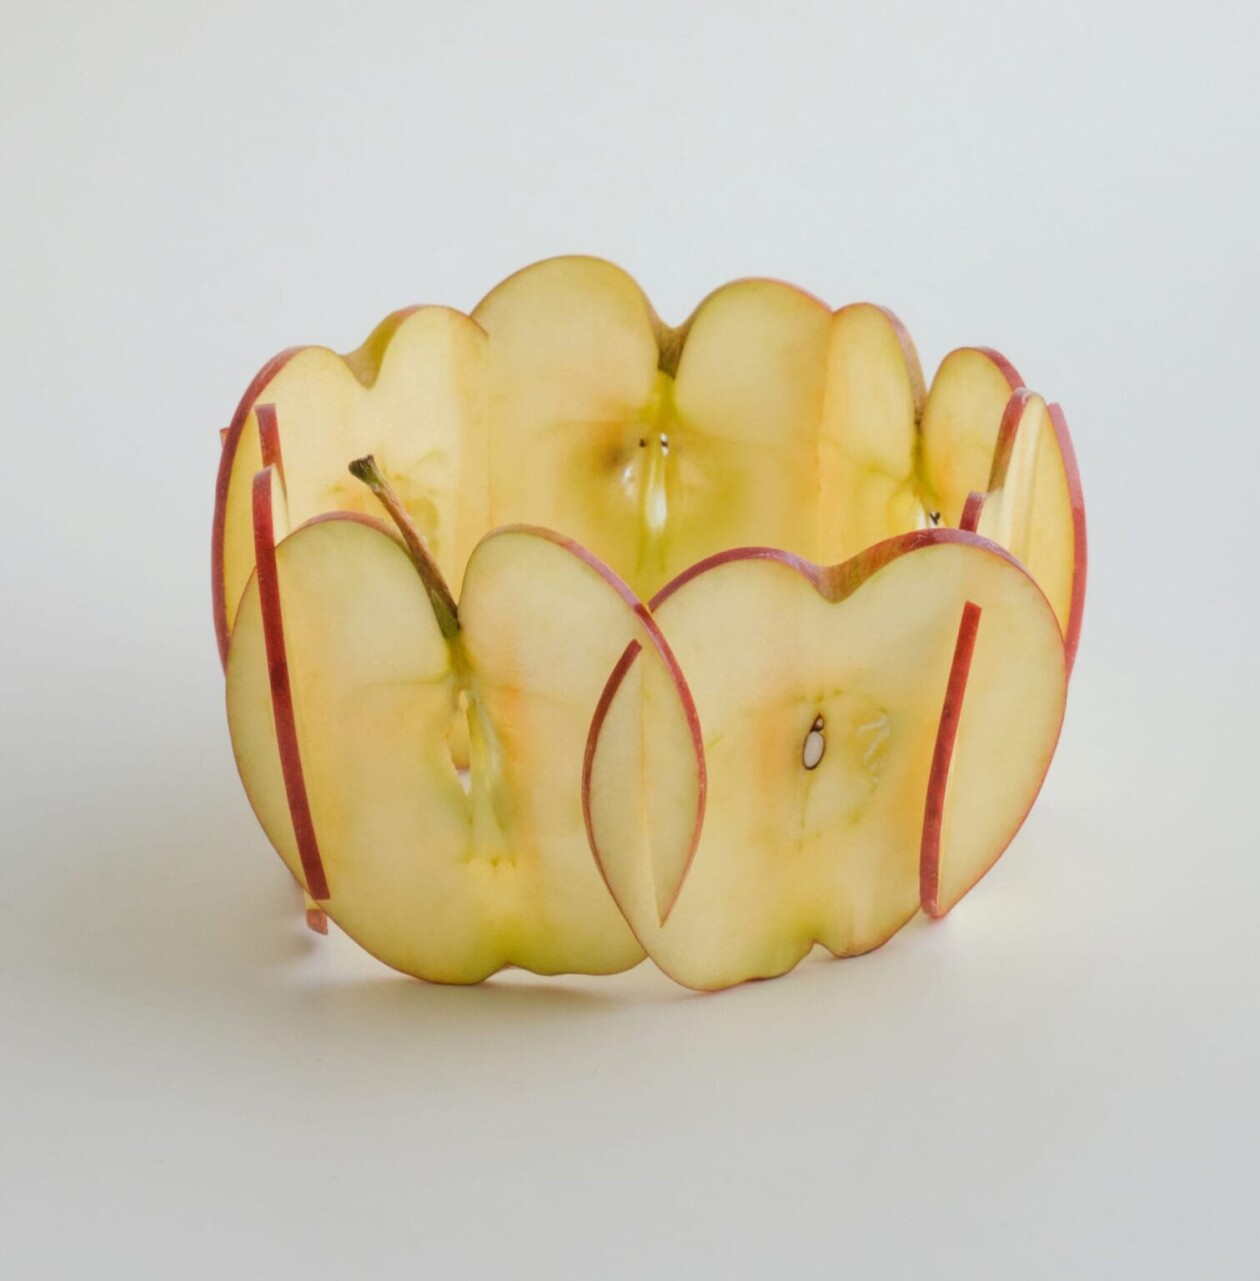 Smart And Playful Sculptures Carved Out Of Apples By Chinese Artist Can Sun (2)